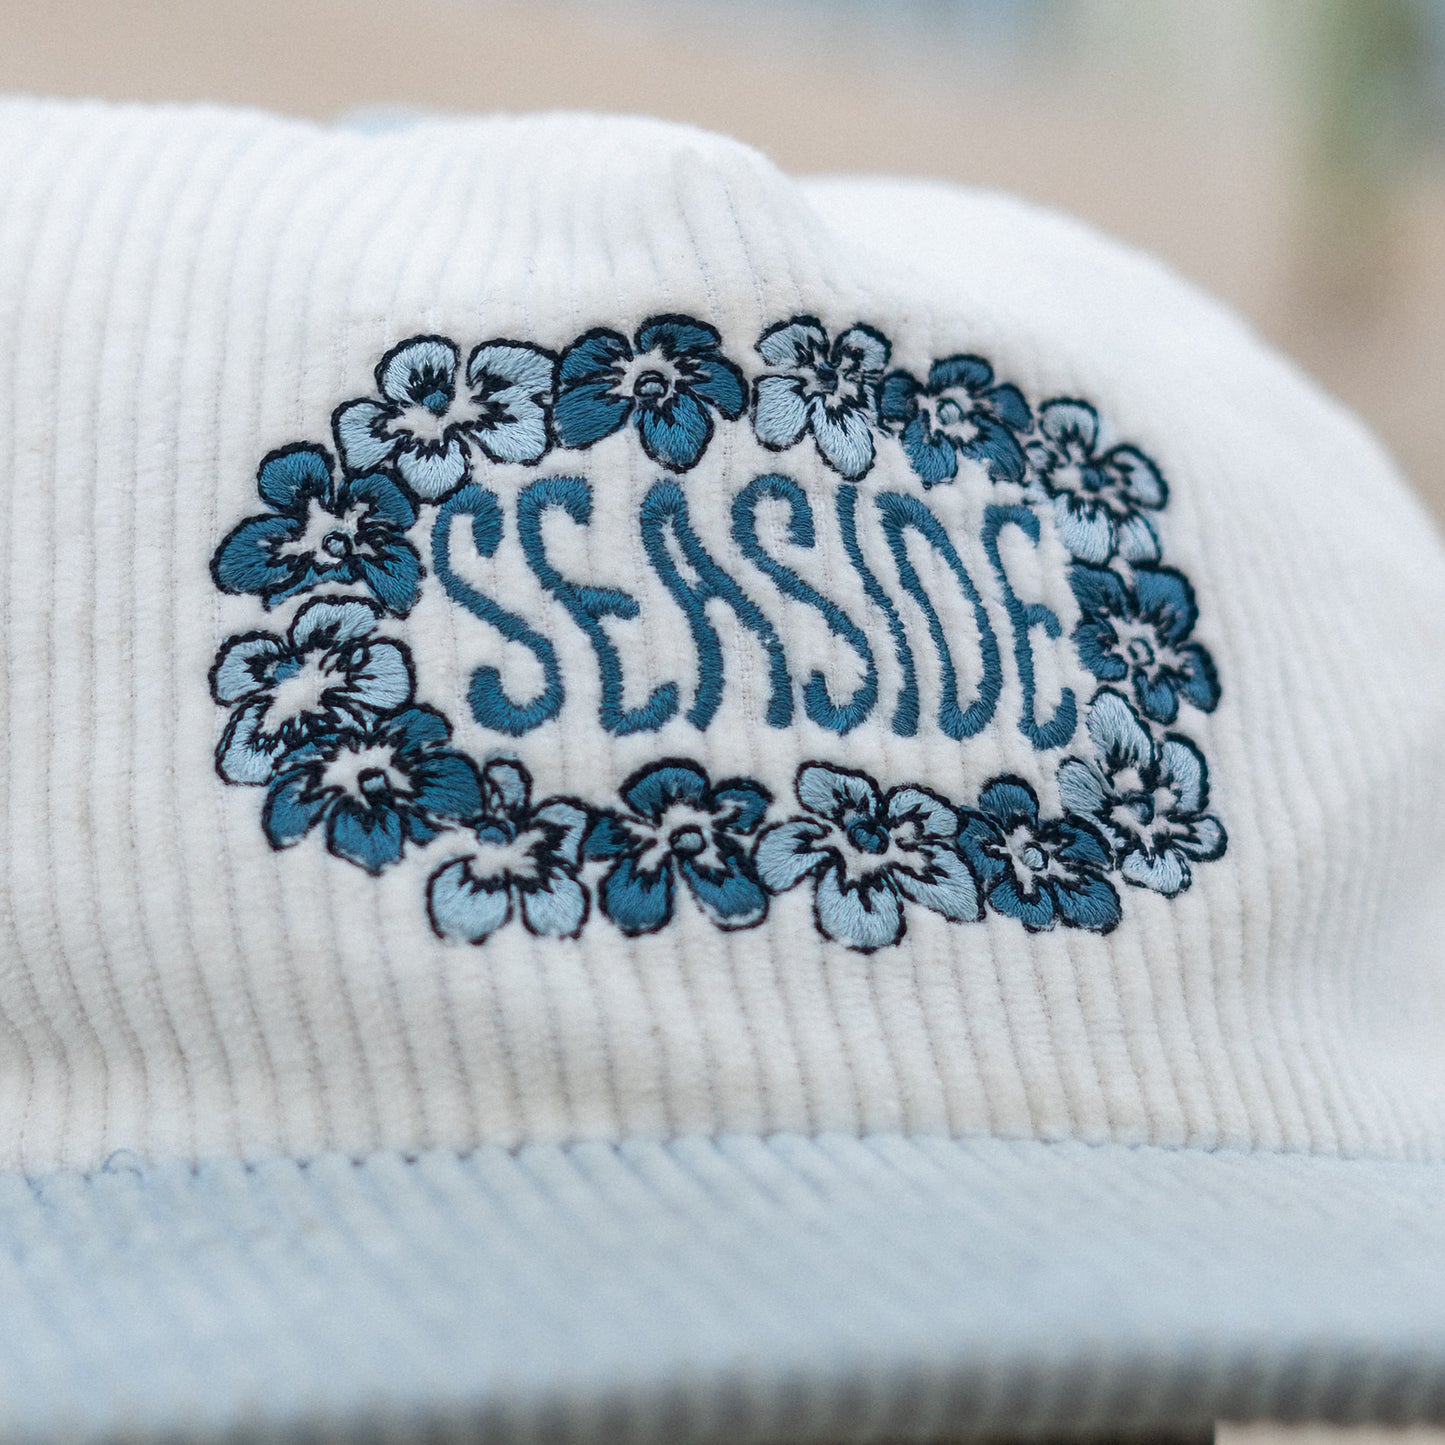 "The Seaside" White and Blue Corduroy 5-panel Hat